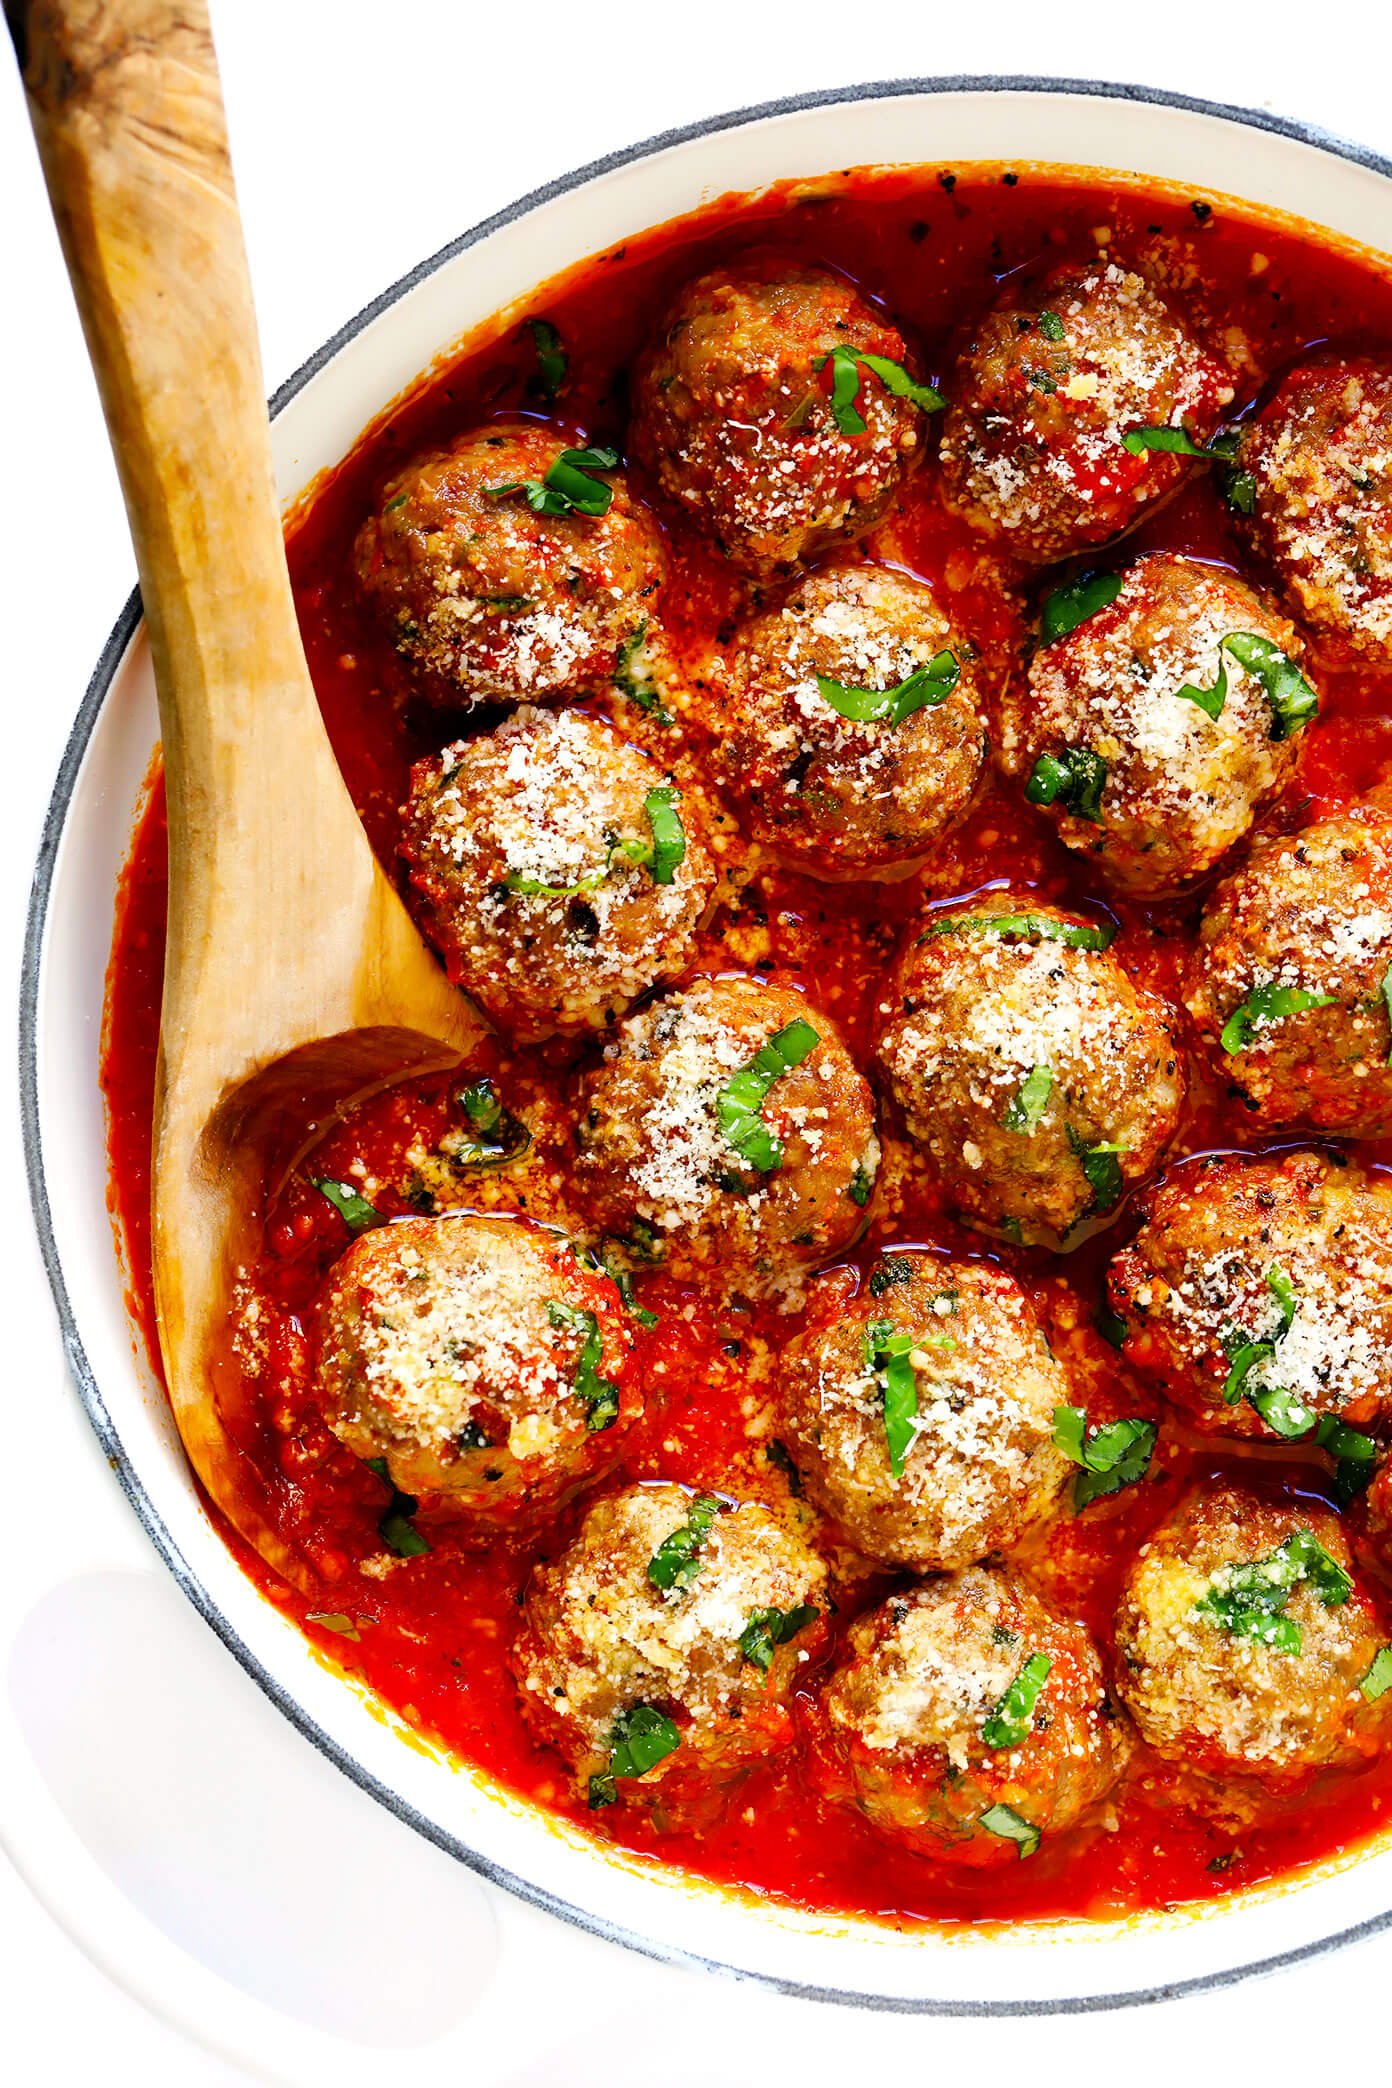 How long does it take to cook meatballs in sauce The Best Meatball Recipe Gimme Some Oven